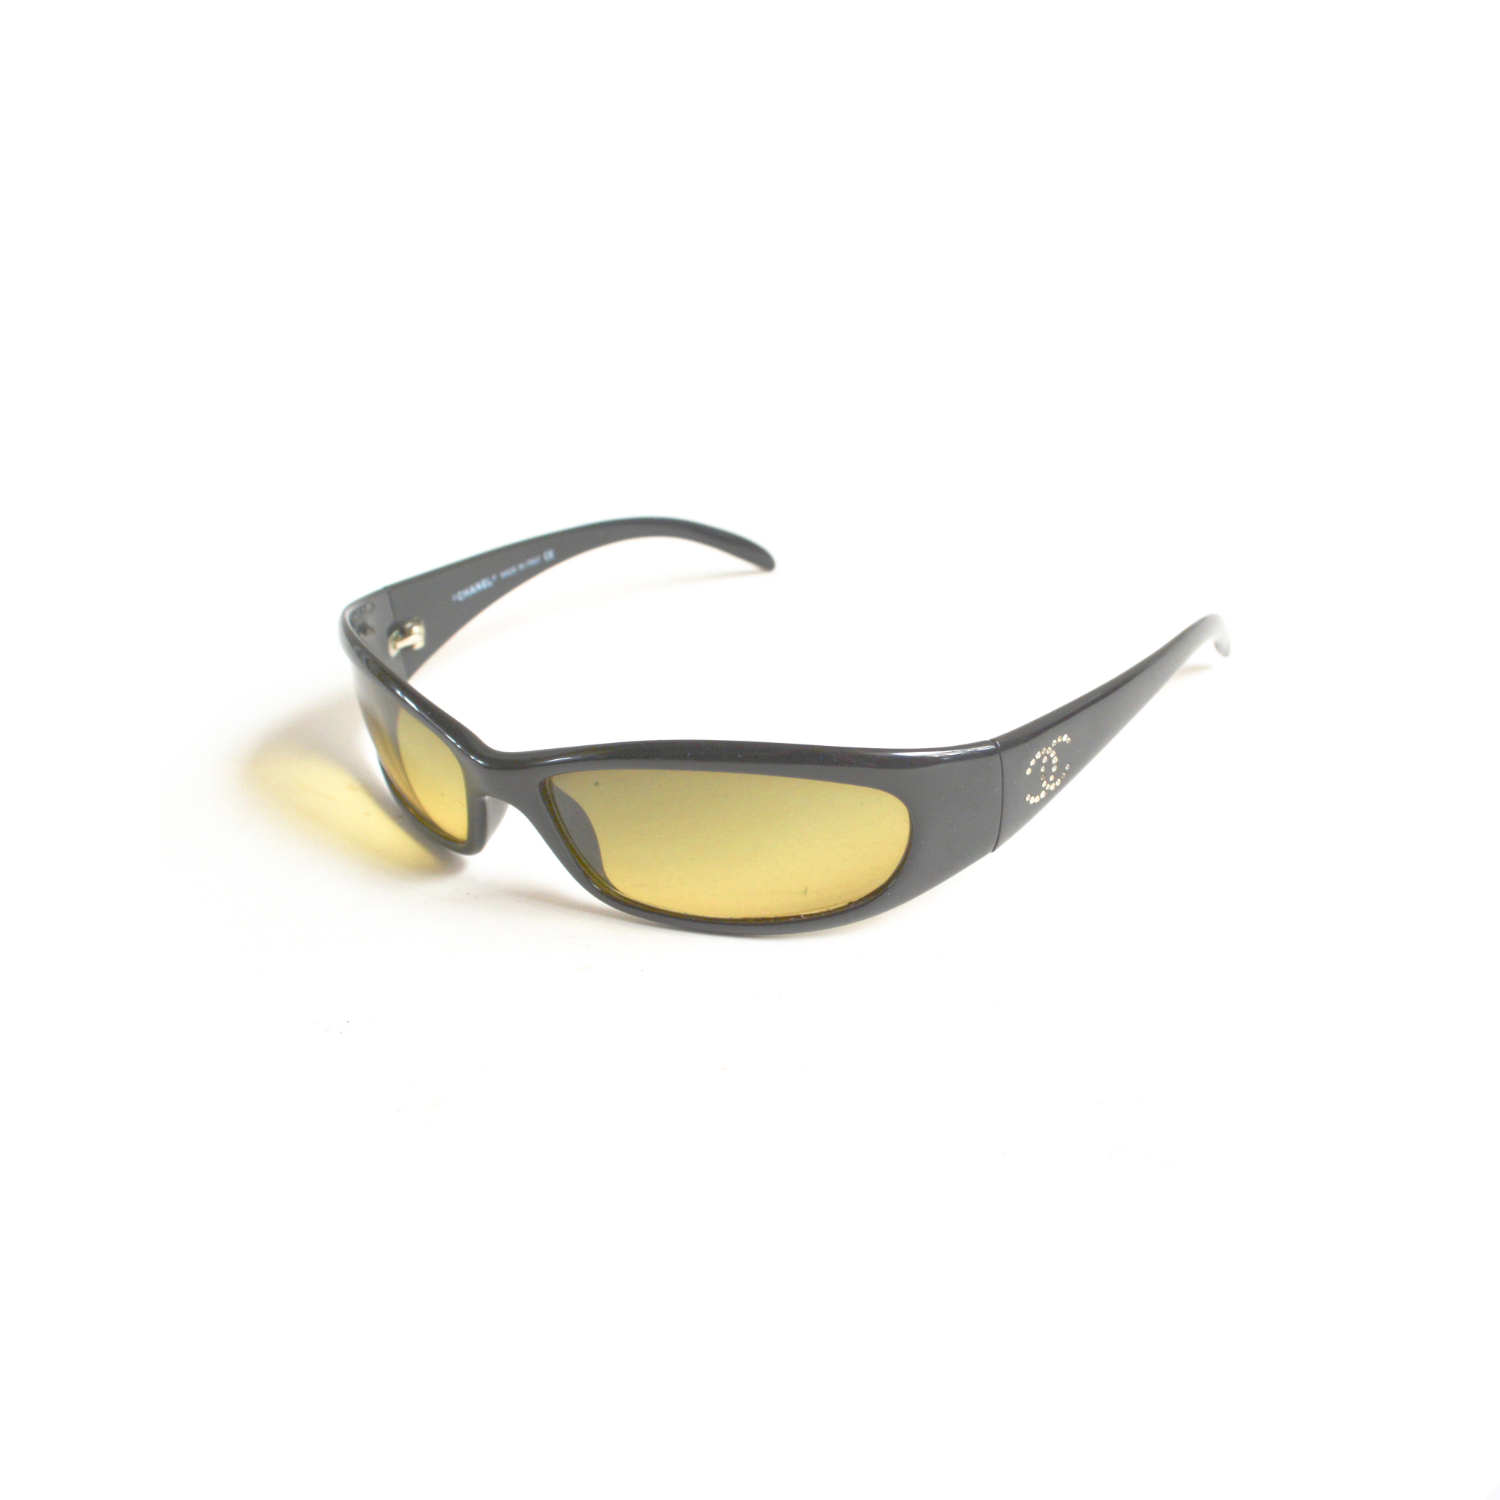 Vintage Chanel Chunky Diamante Sunglasses in black and yellow | NITRYL